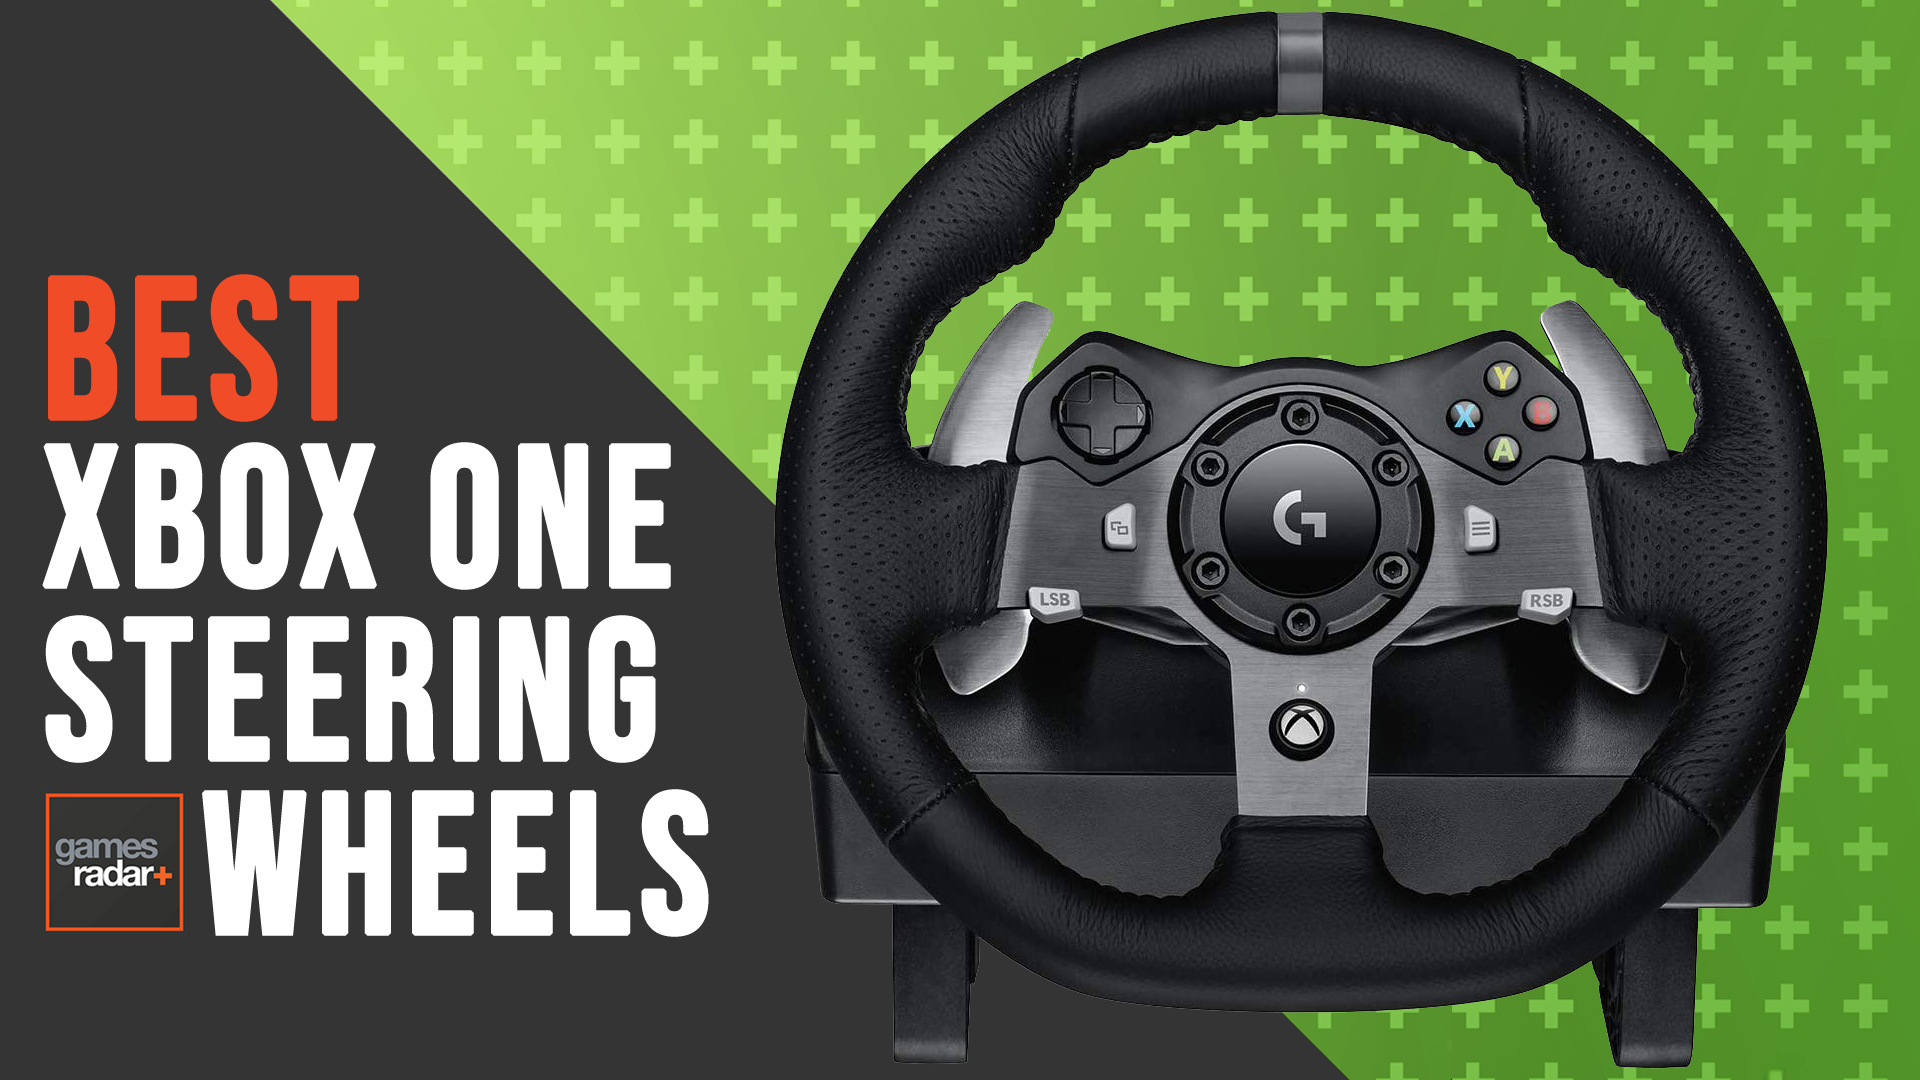 hori racing wheel overdrive for xbox one manual